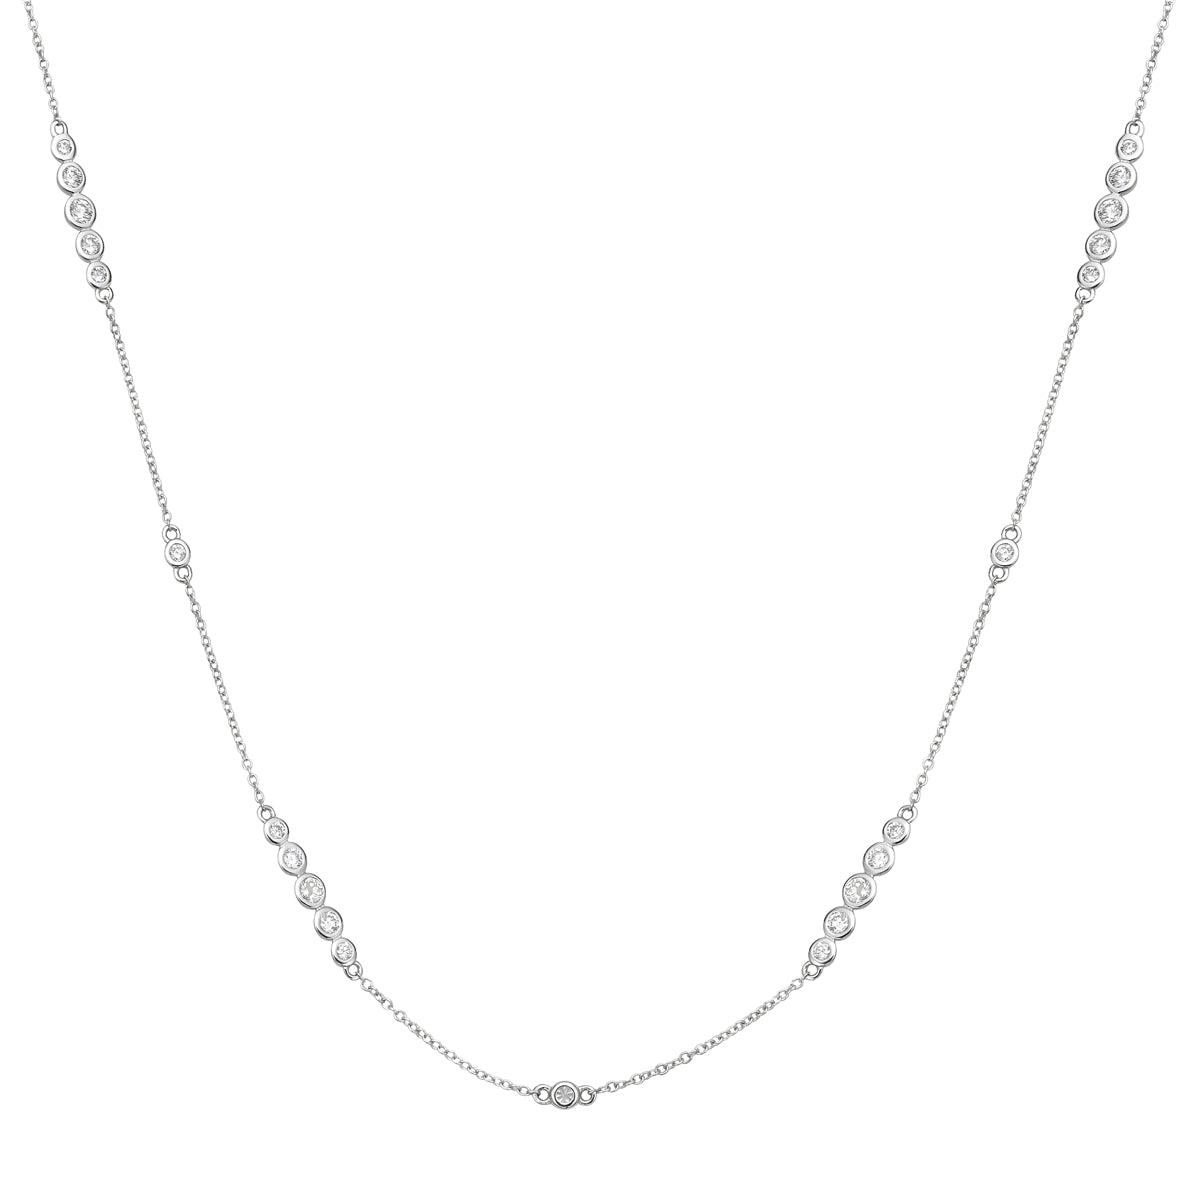 Necklace 14KW/3.2G 12RD-0.72CT 61RD-1.79CT